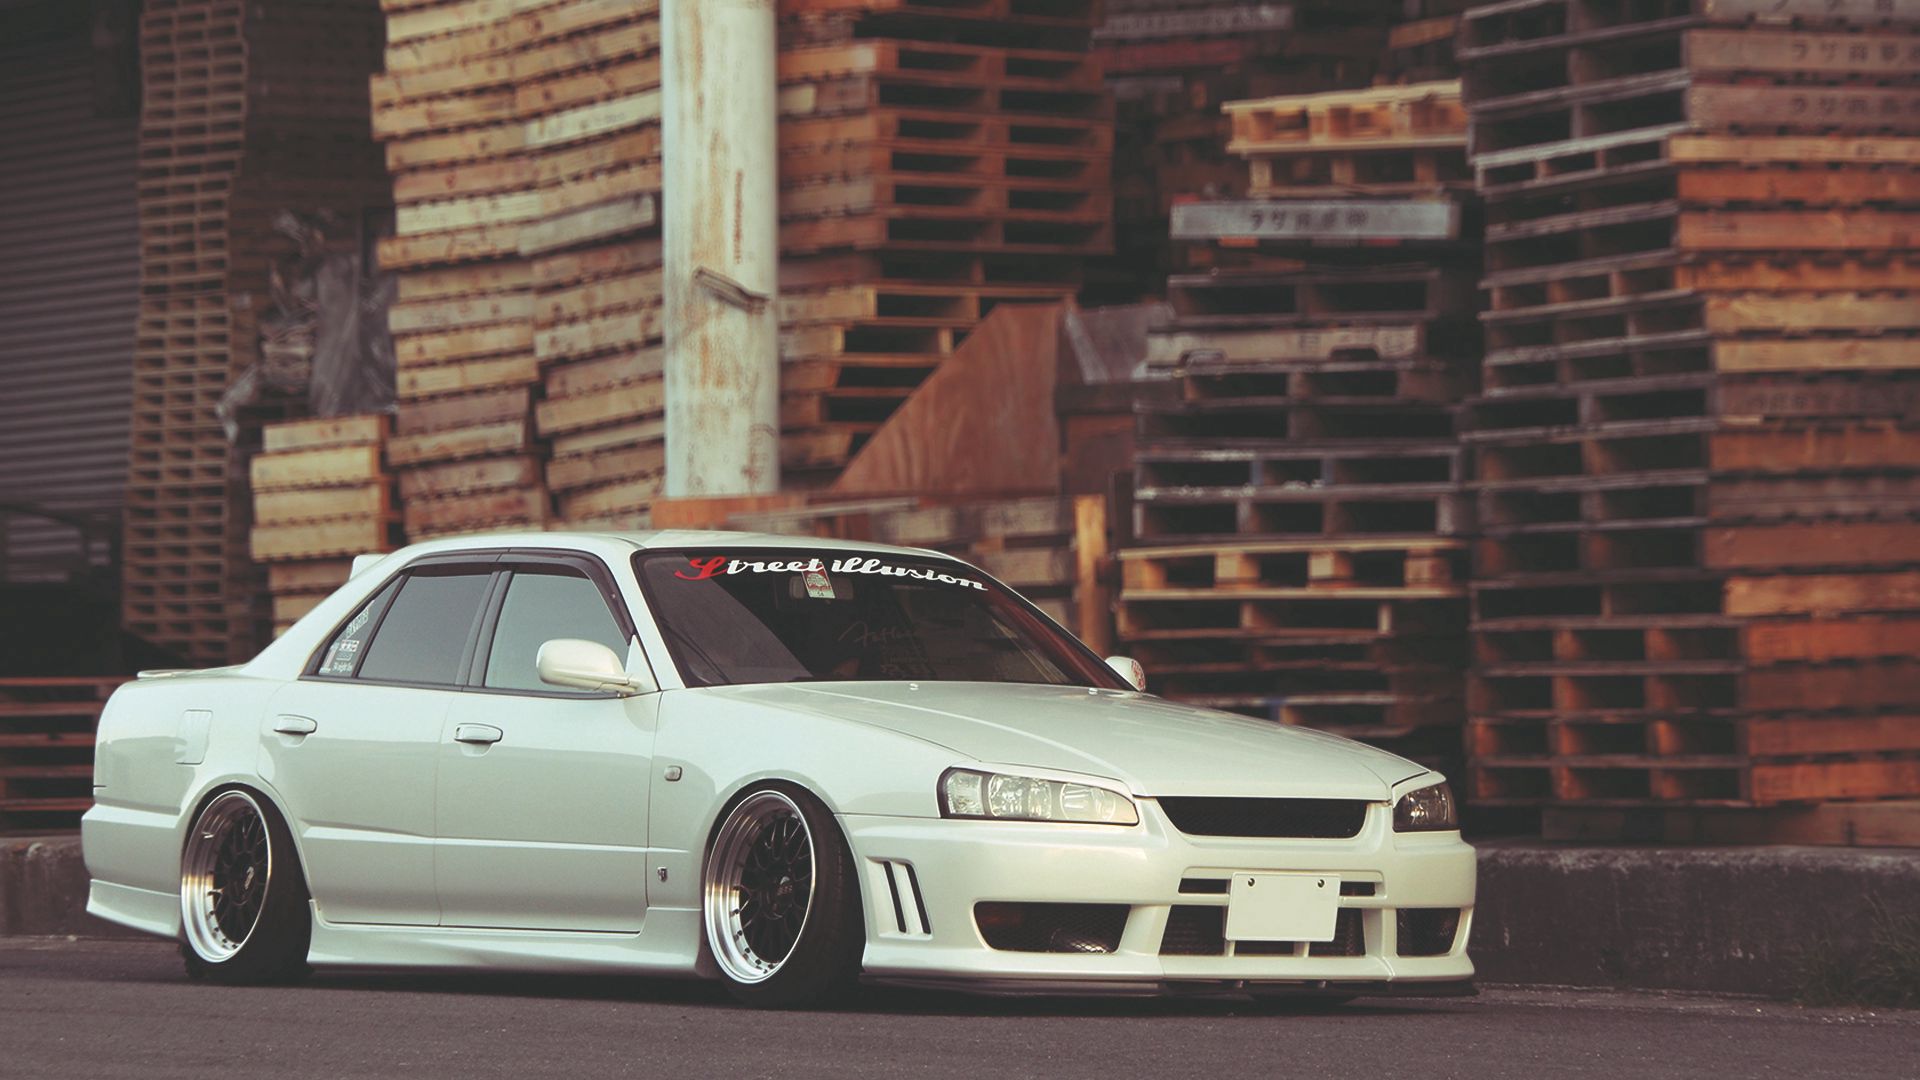 cars, skyline, nissan, white, side view